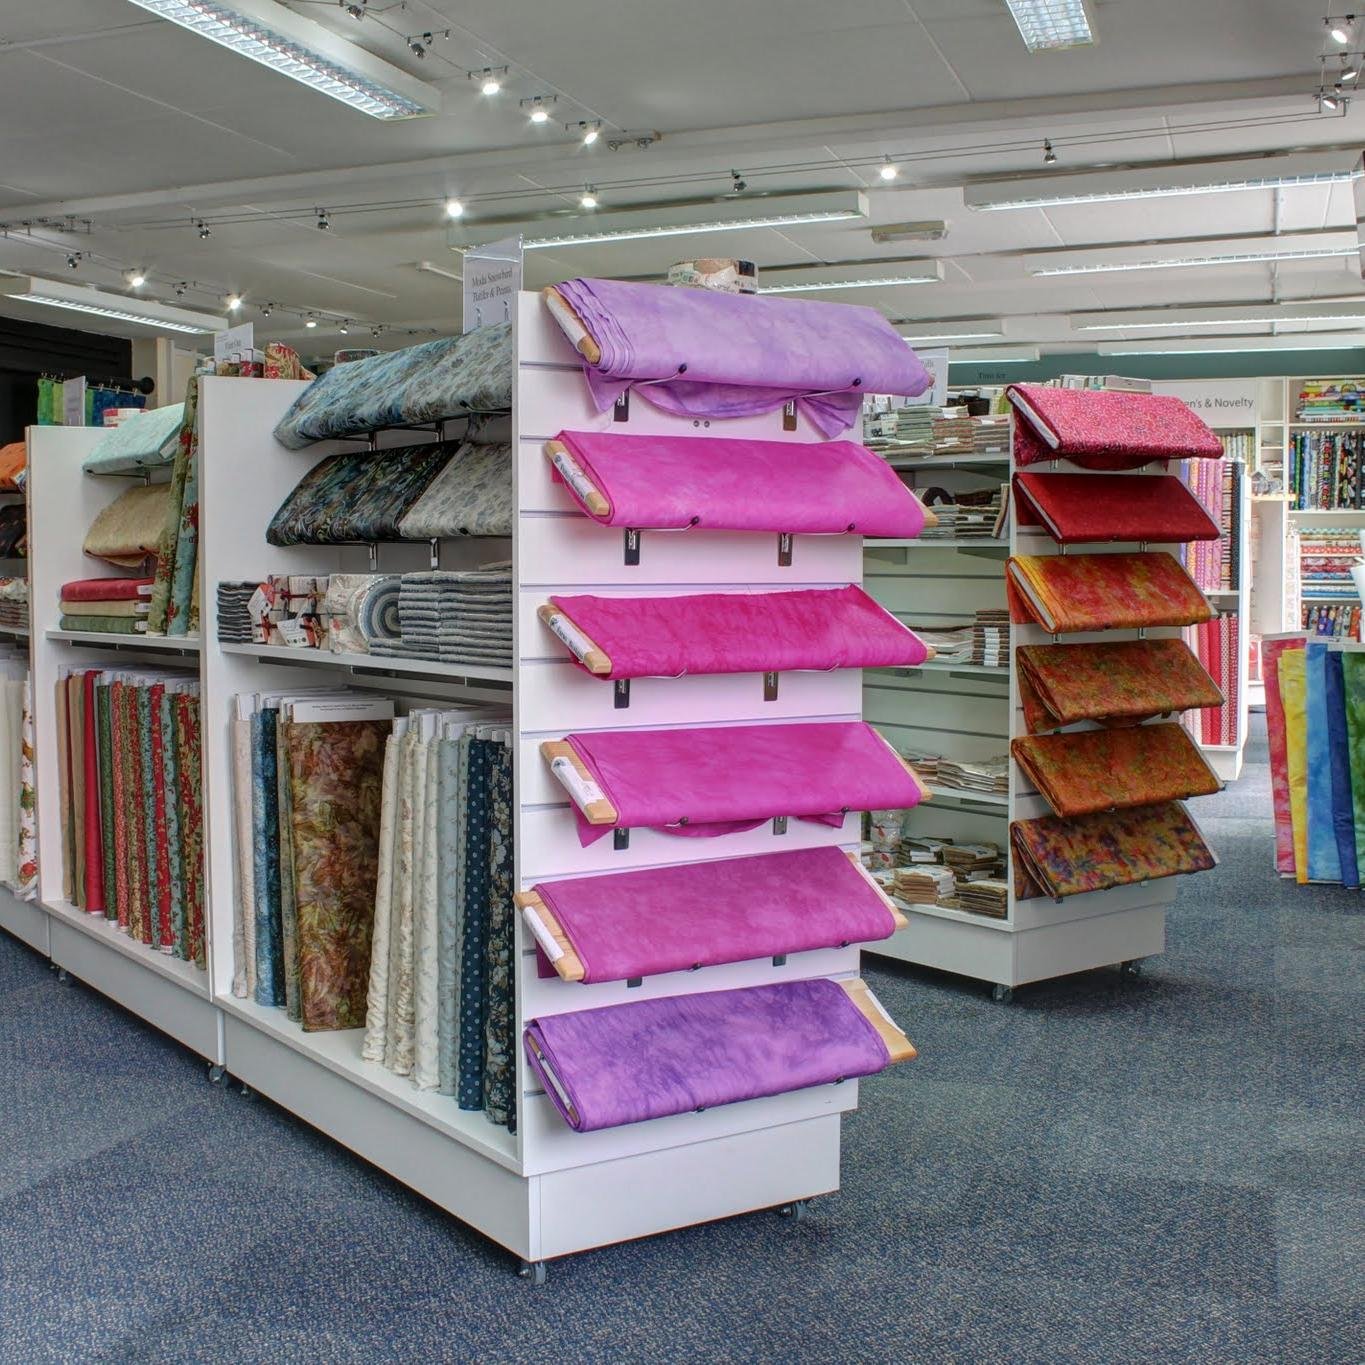 Sewing, Embroidery & Quilting Machine Specialist, with a comprehensive range of patchwork fabric and accessories for your sewing needs. Plus Classes & Workshops